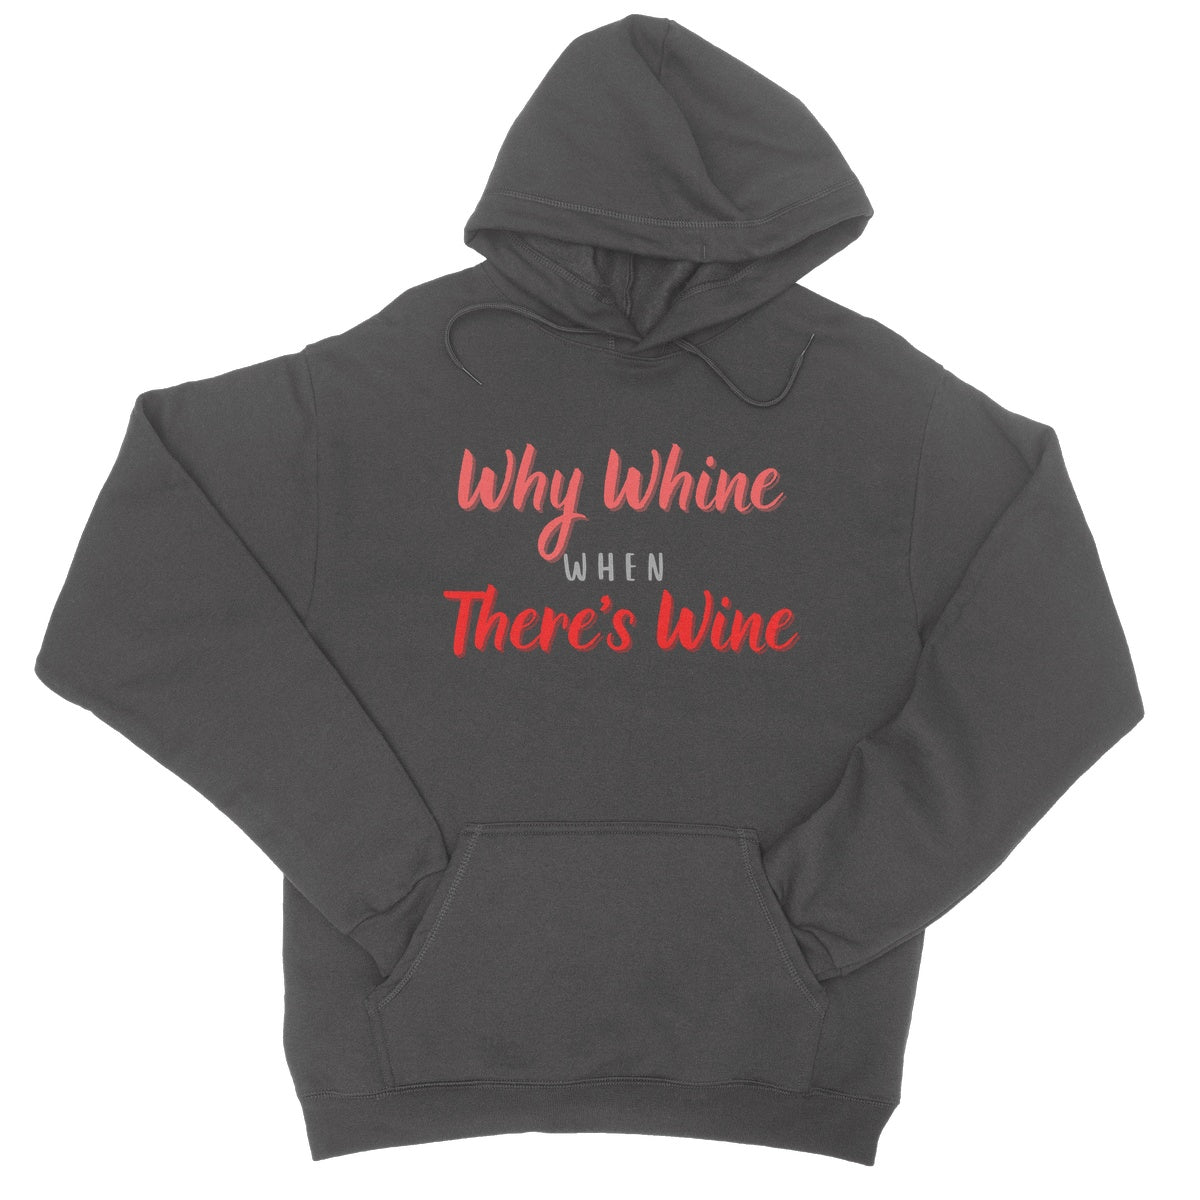 why whine when there's wine hoodie grey